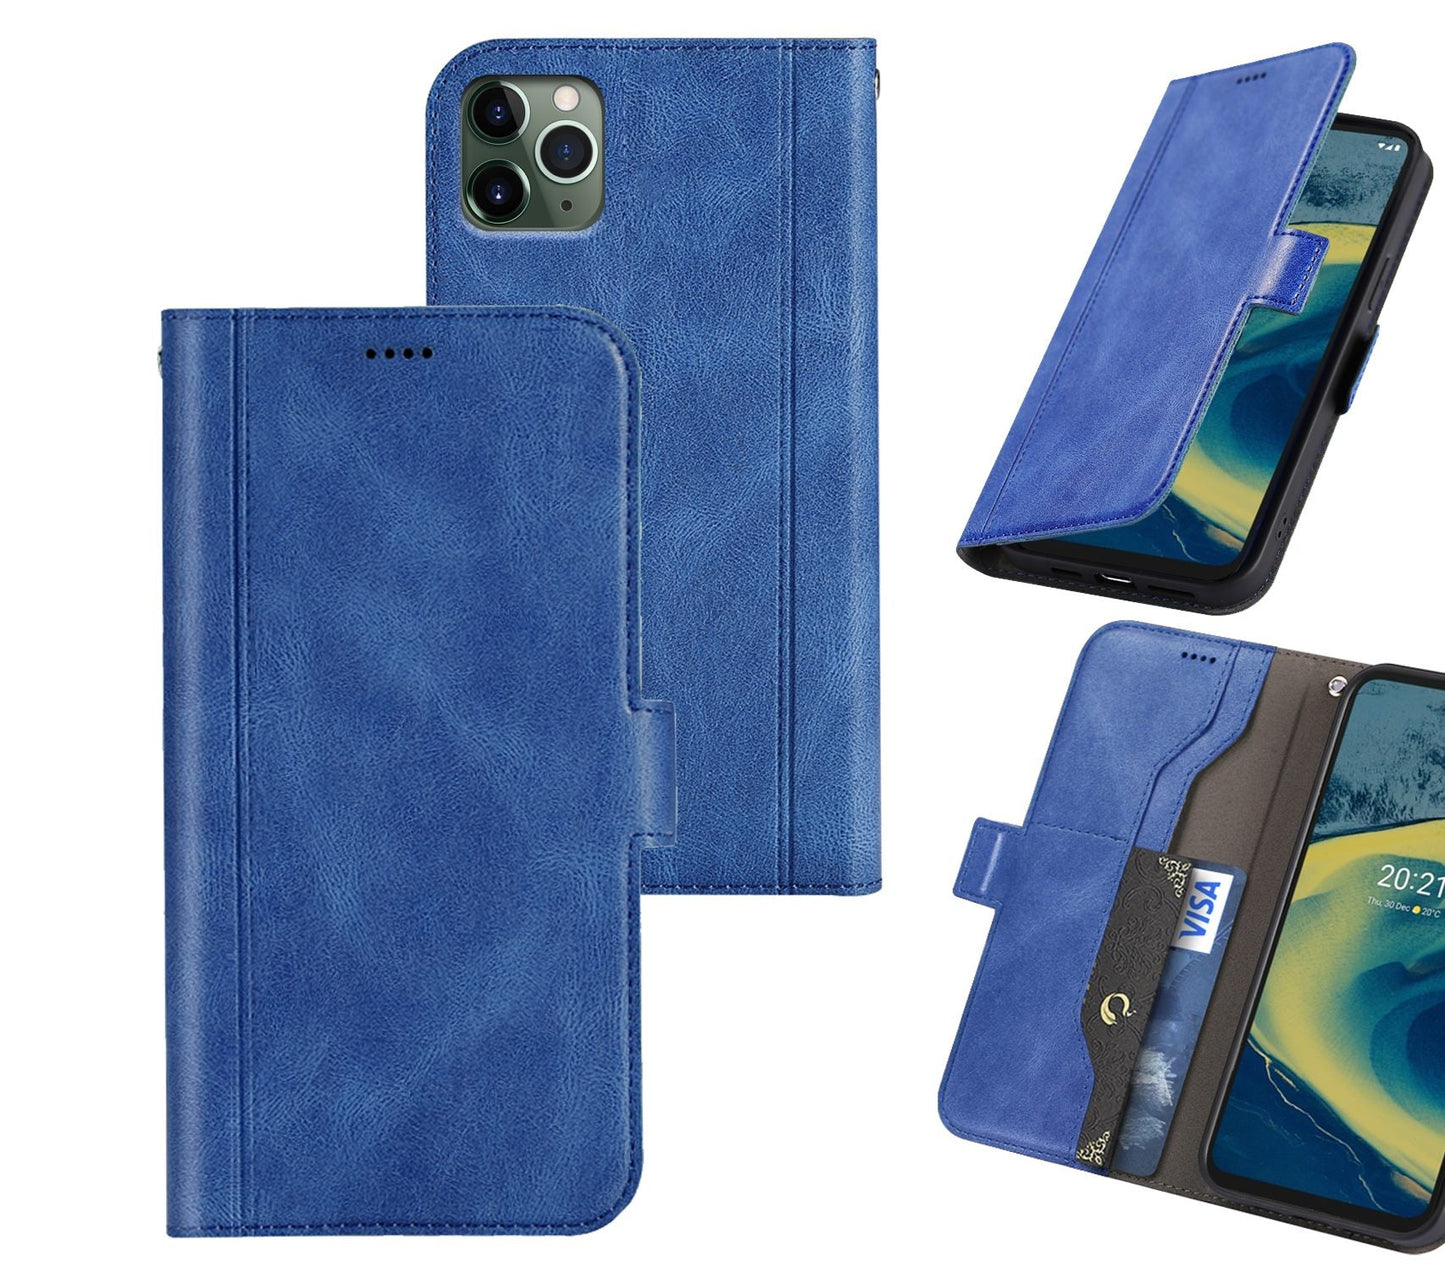 iPhone 11 Pro Max Case Wallet Cover Blue